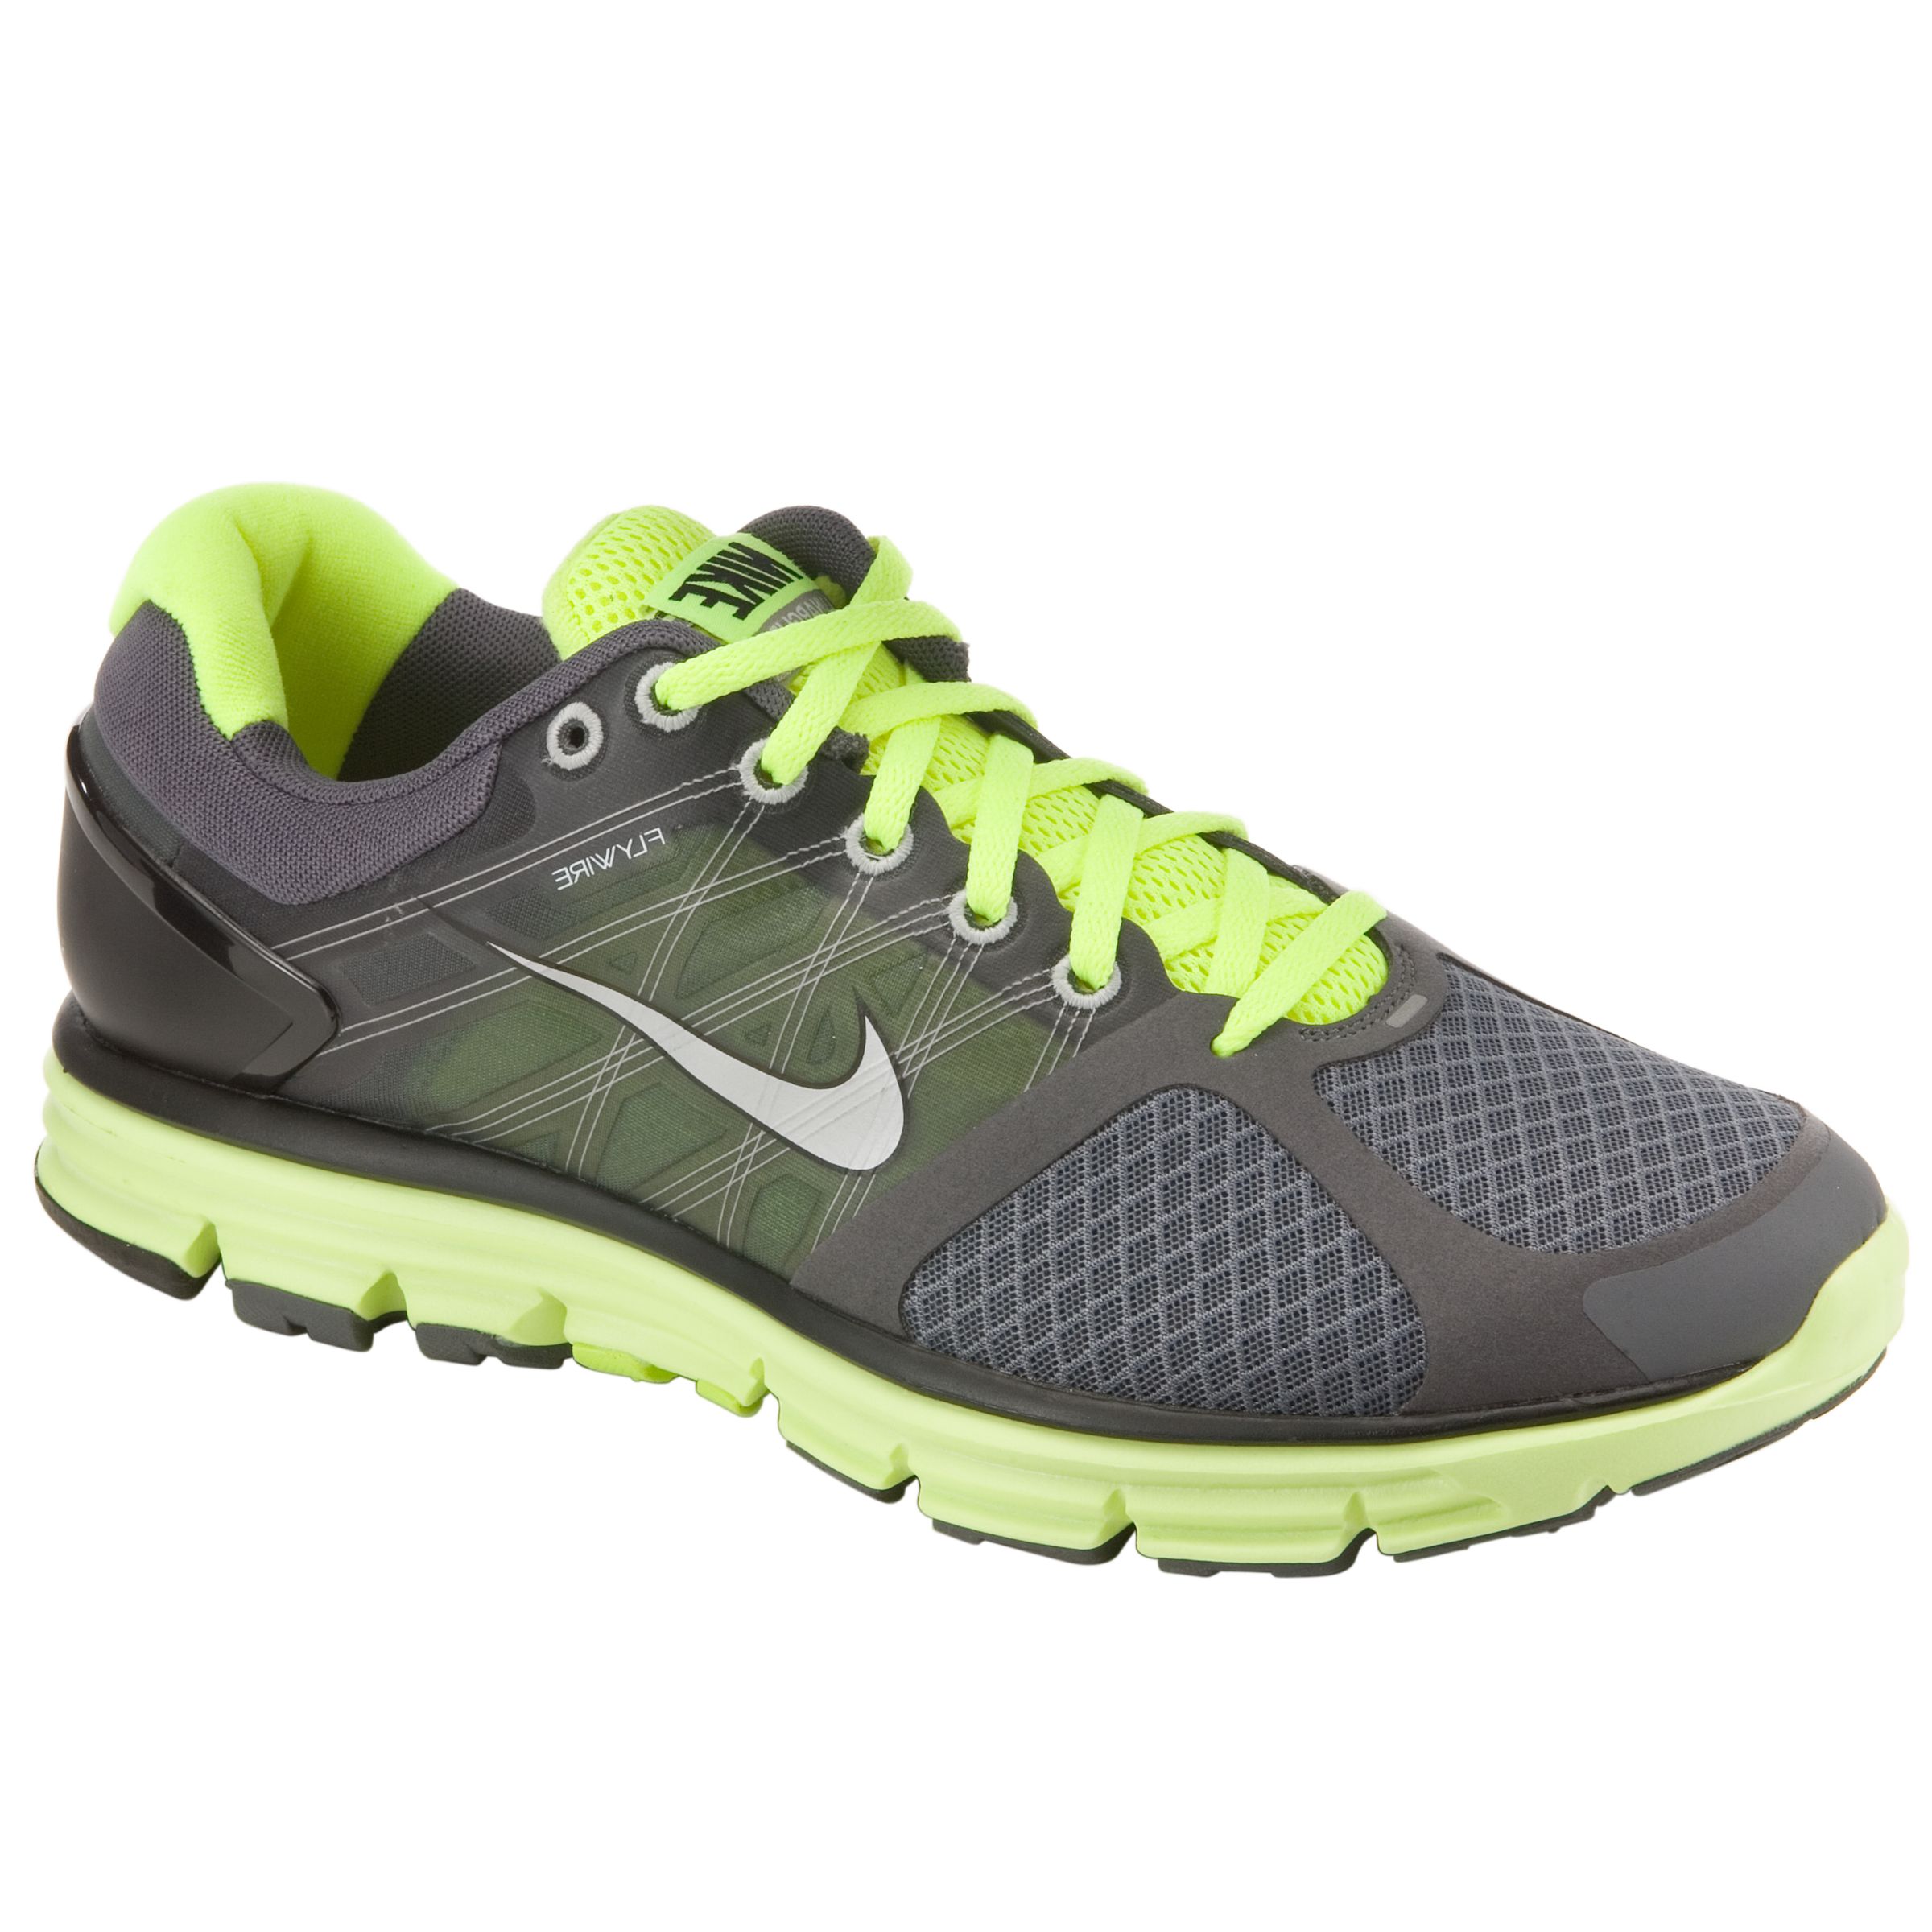 Download this Matching Running Shoes Nike Lunarglide Nik picture